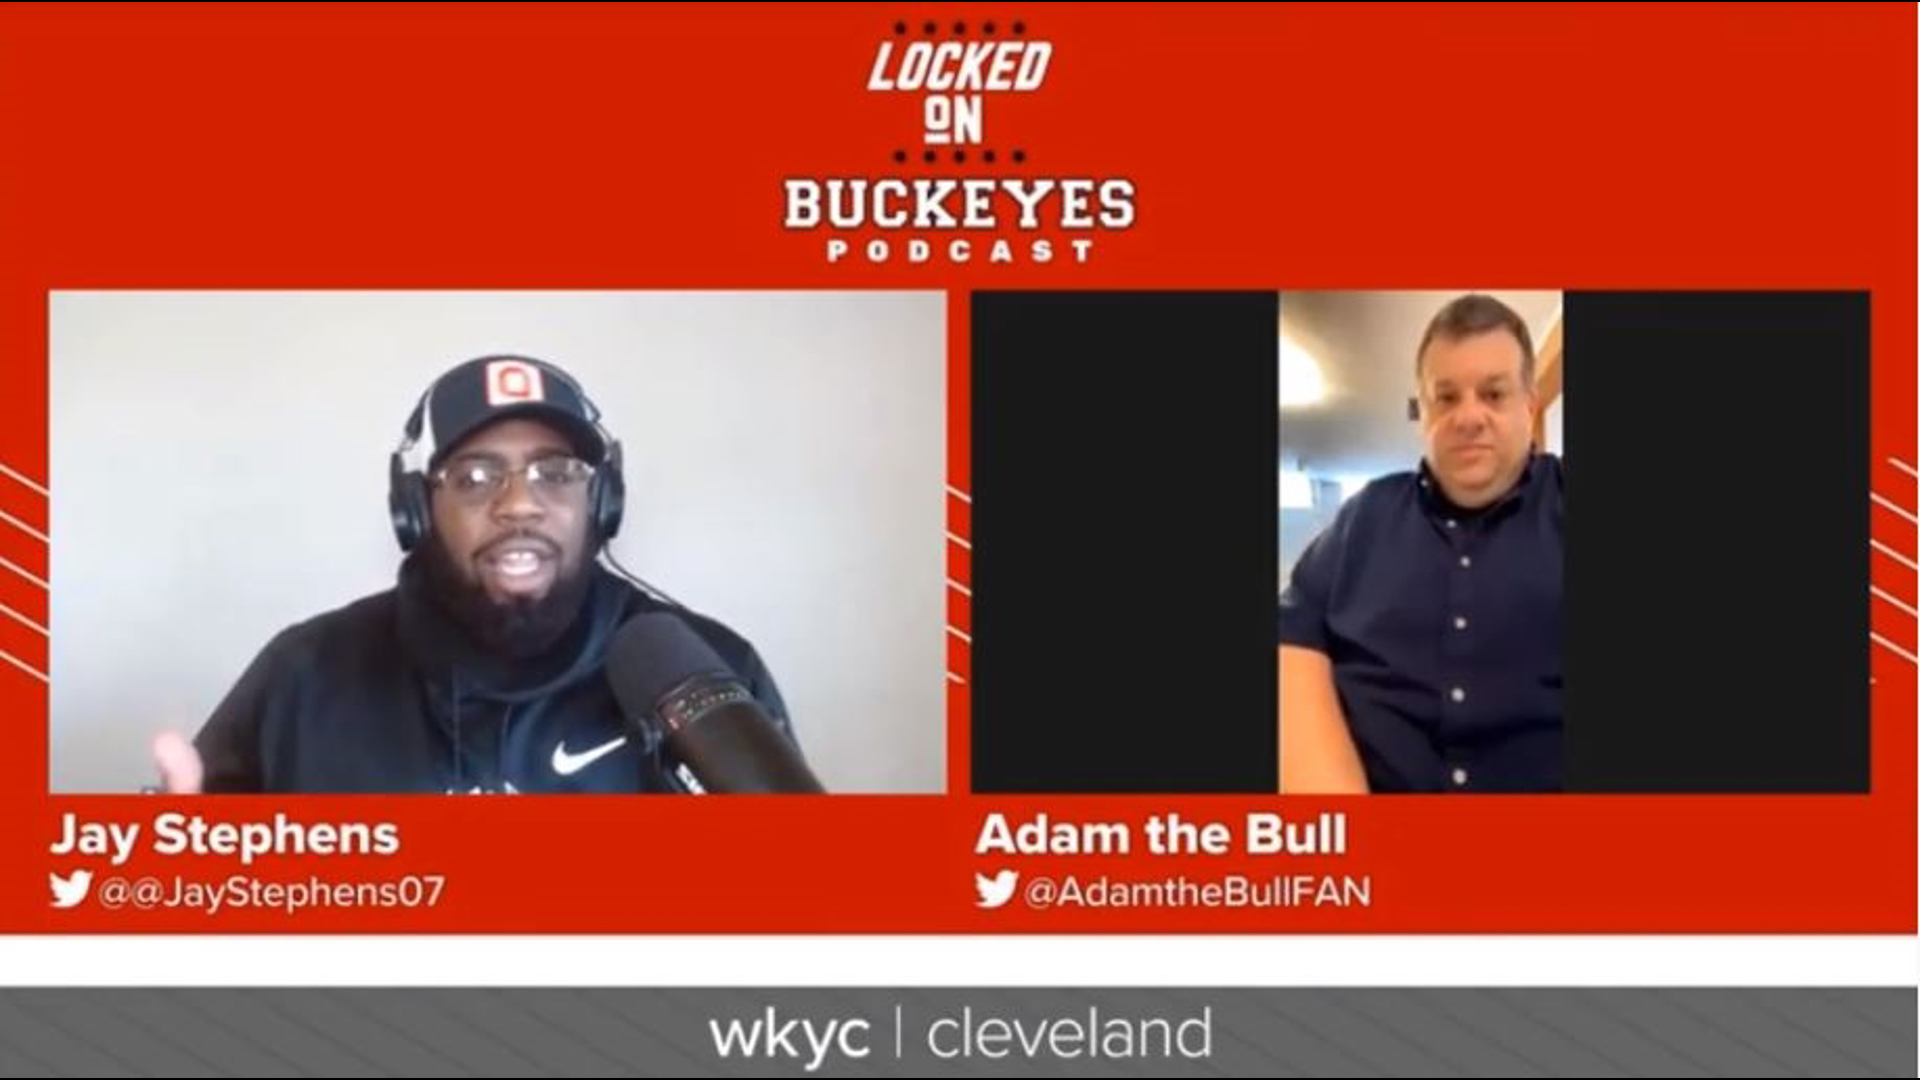 Adam “The Bull” has been on 92.3 The Fan in Cleveland for years. Now he’s joined the Ultimate Cleveland Sports Show with Jay Crawford.